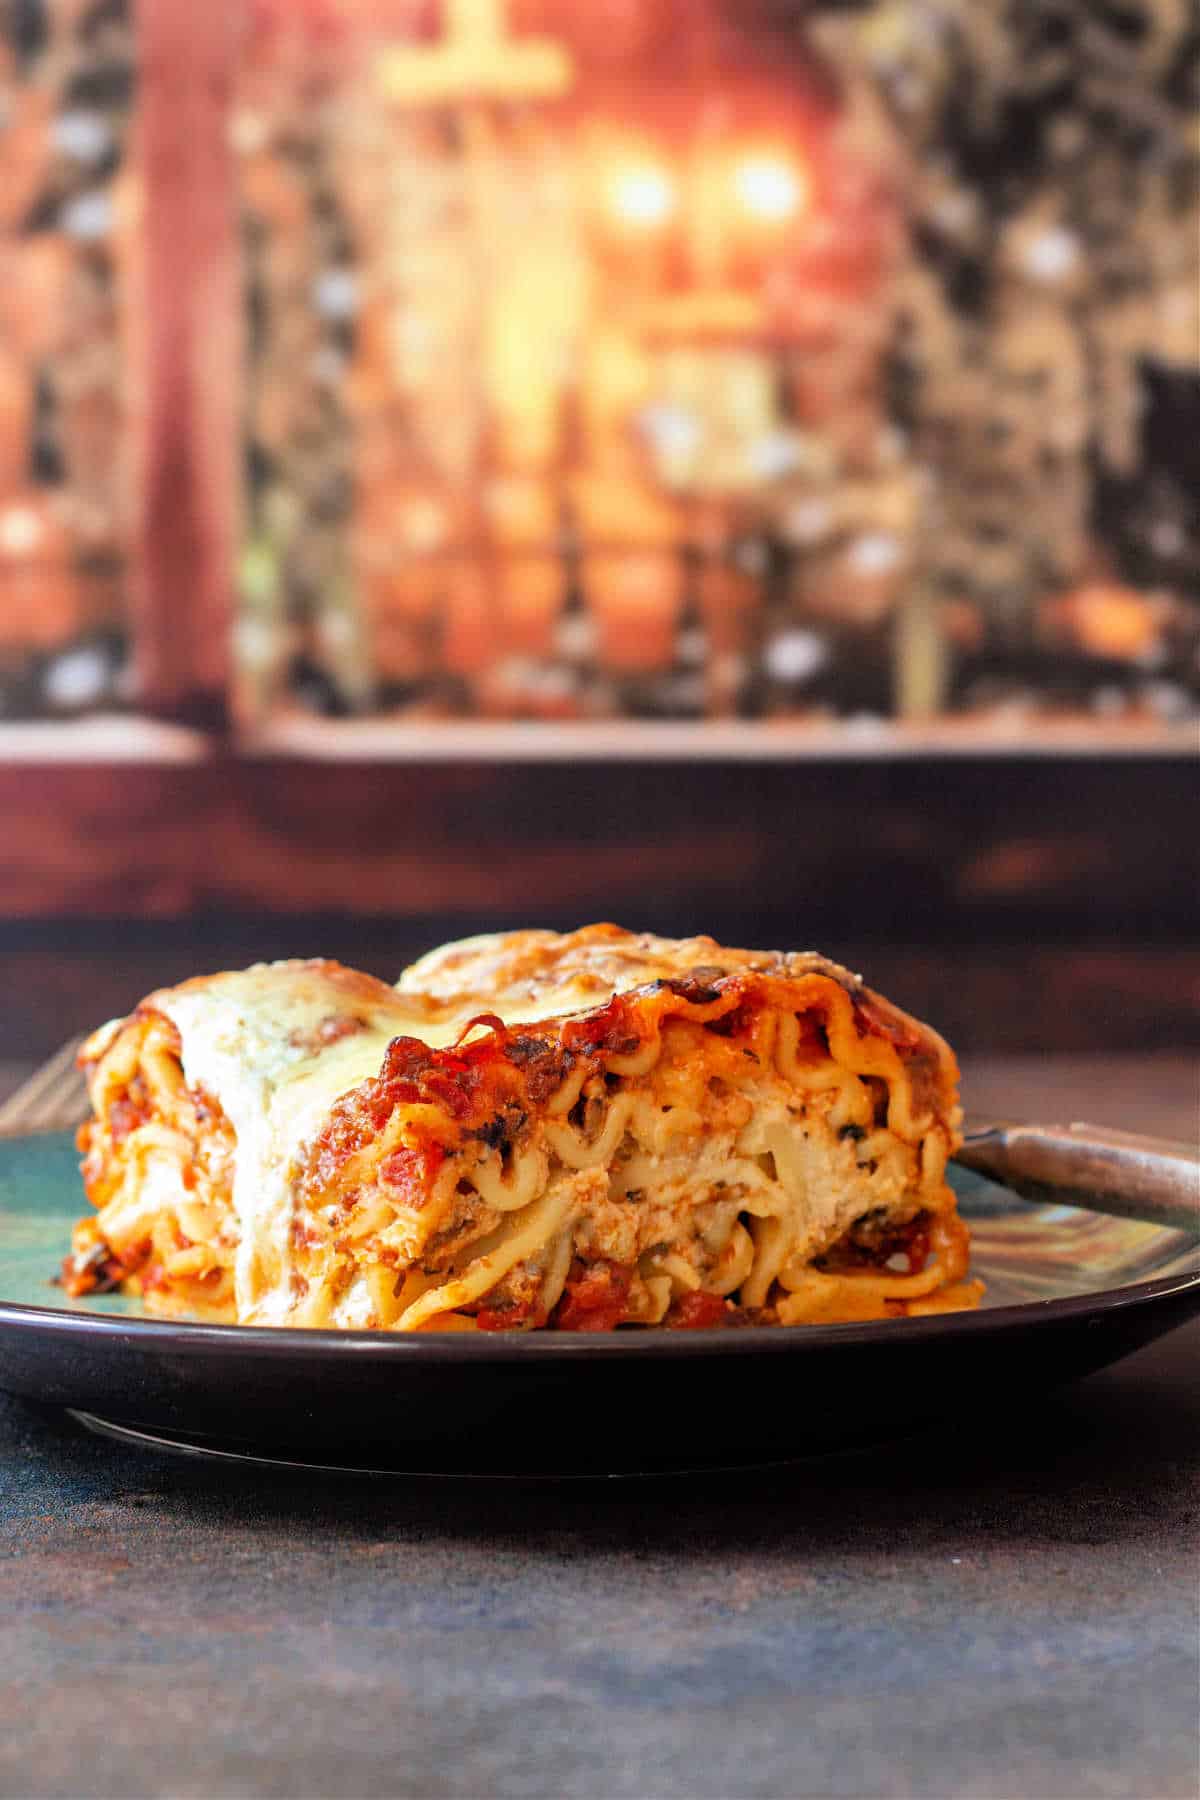 A large square of Italian sausage lasagna on a plate in front of a window at night.